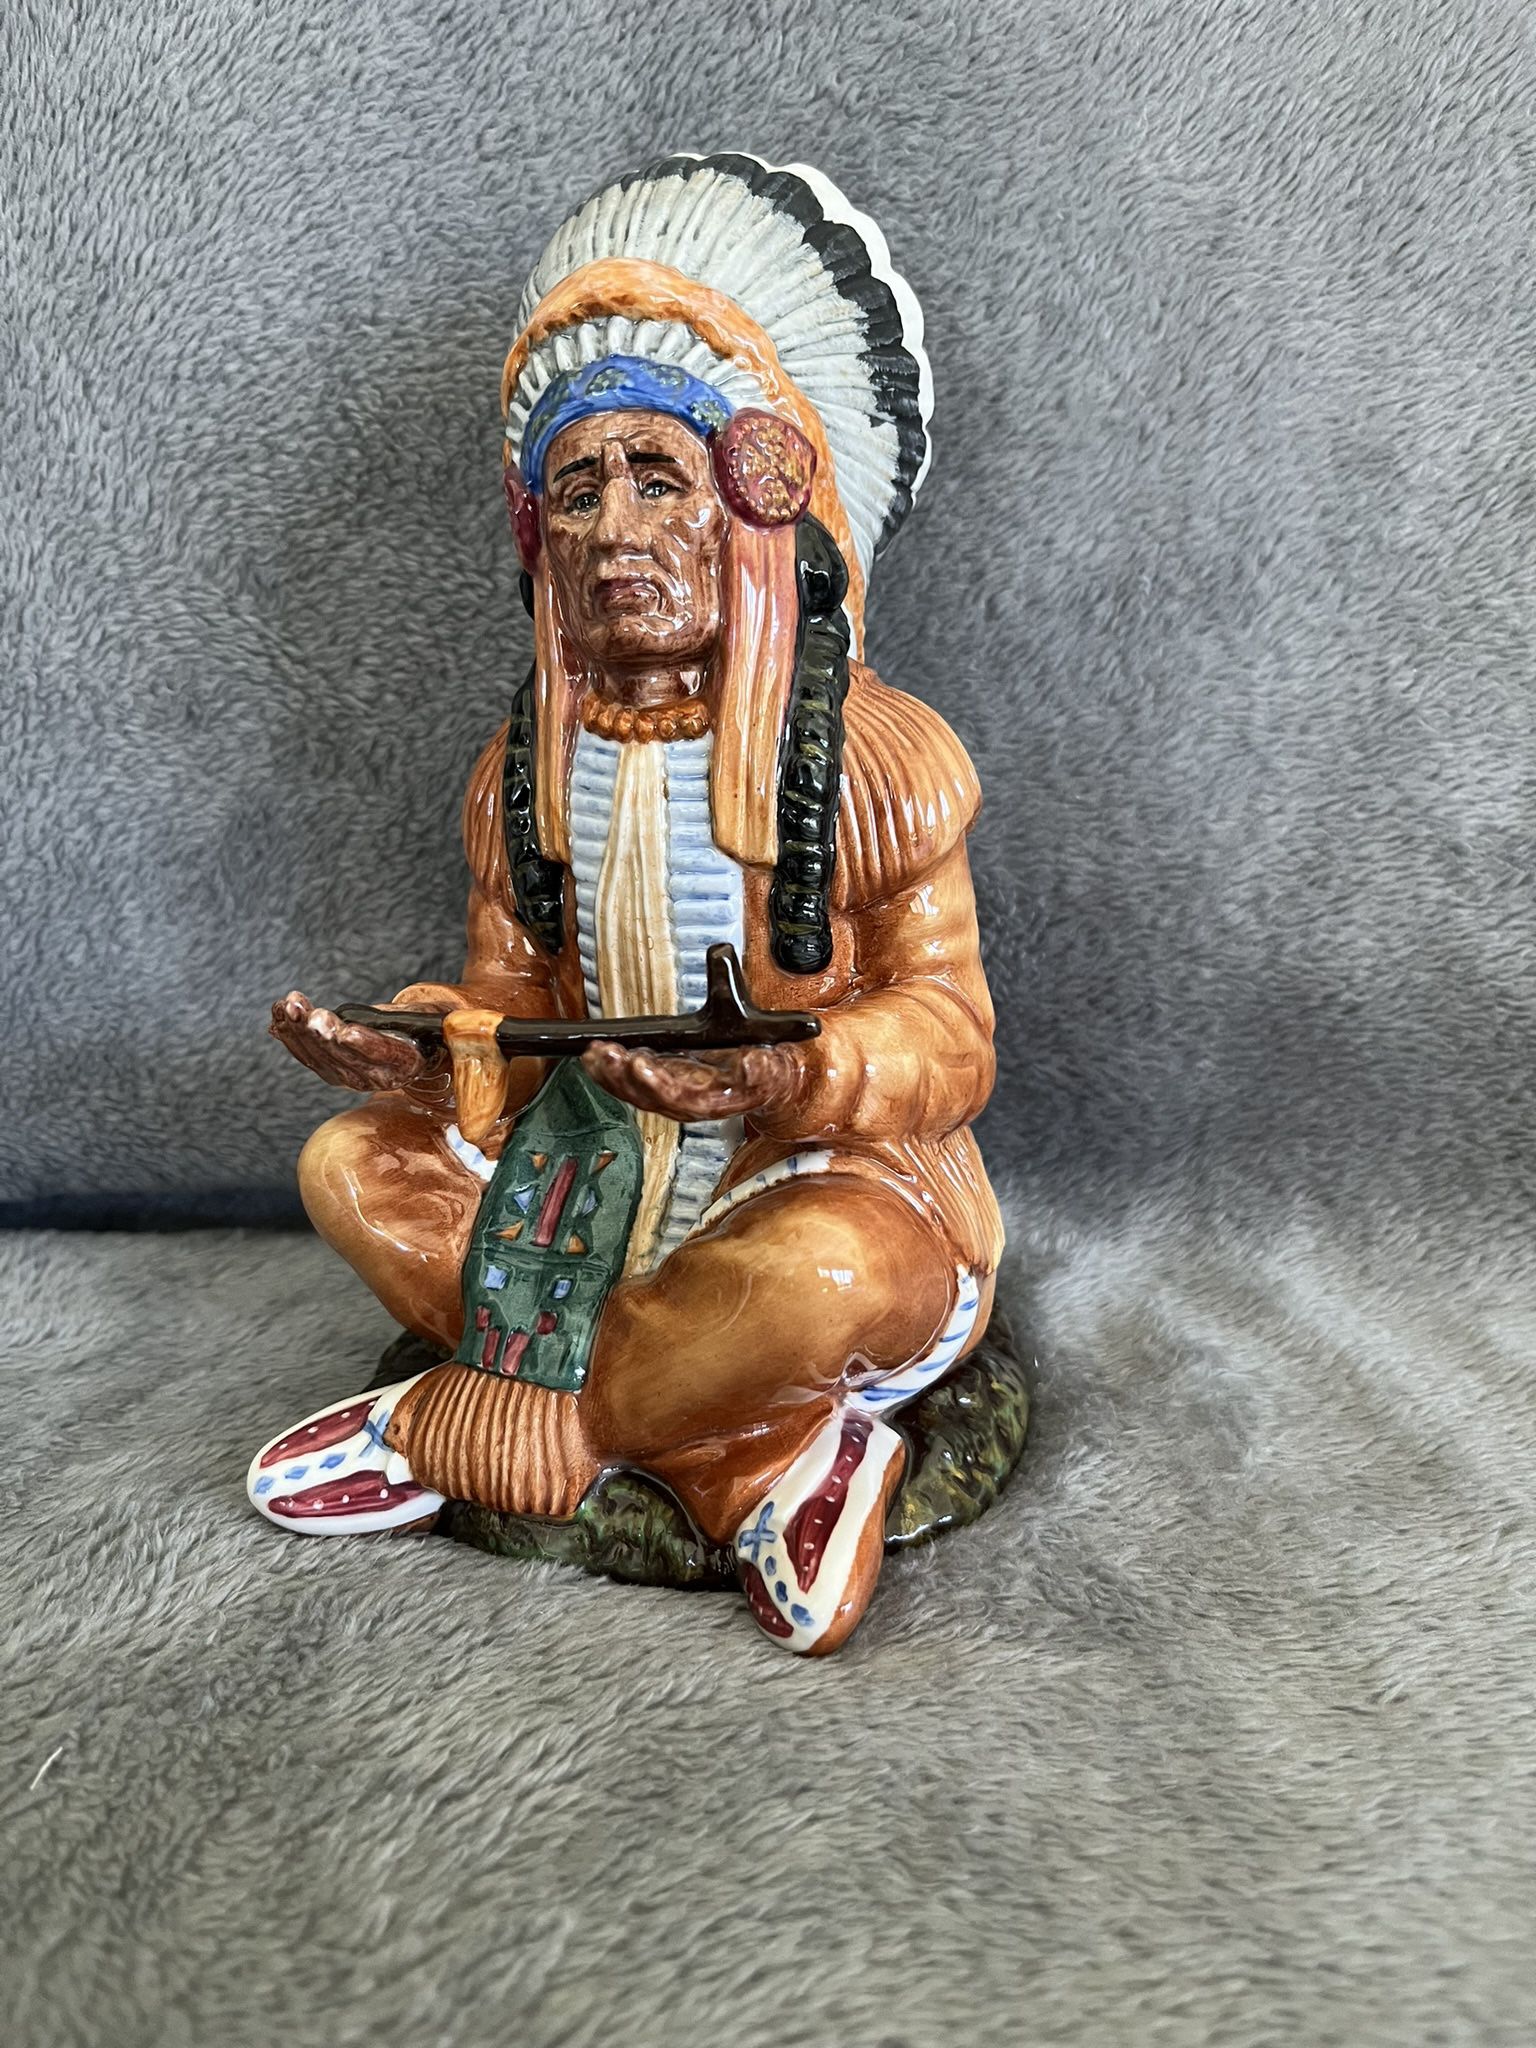 Royal Doulton “The Chief” Figurine